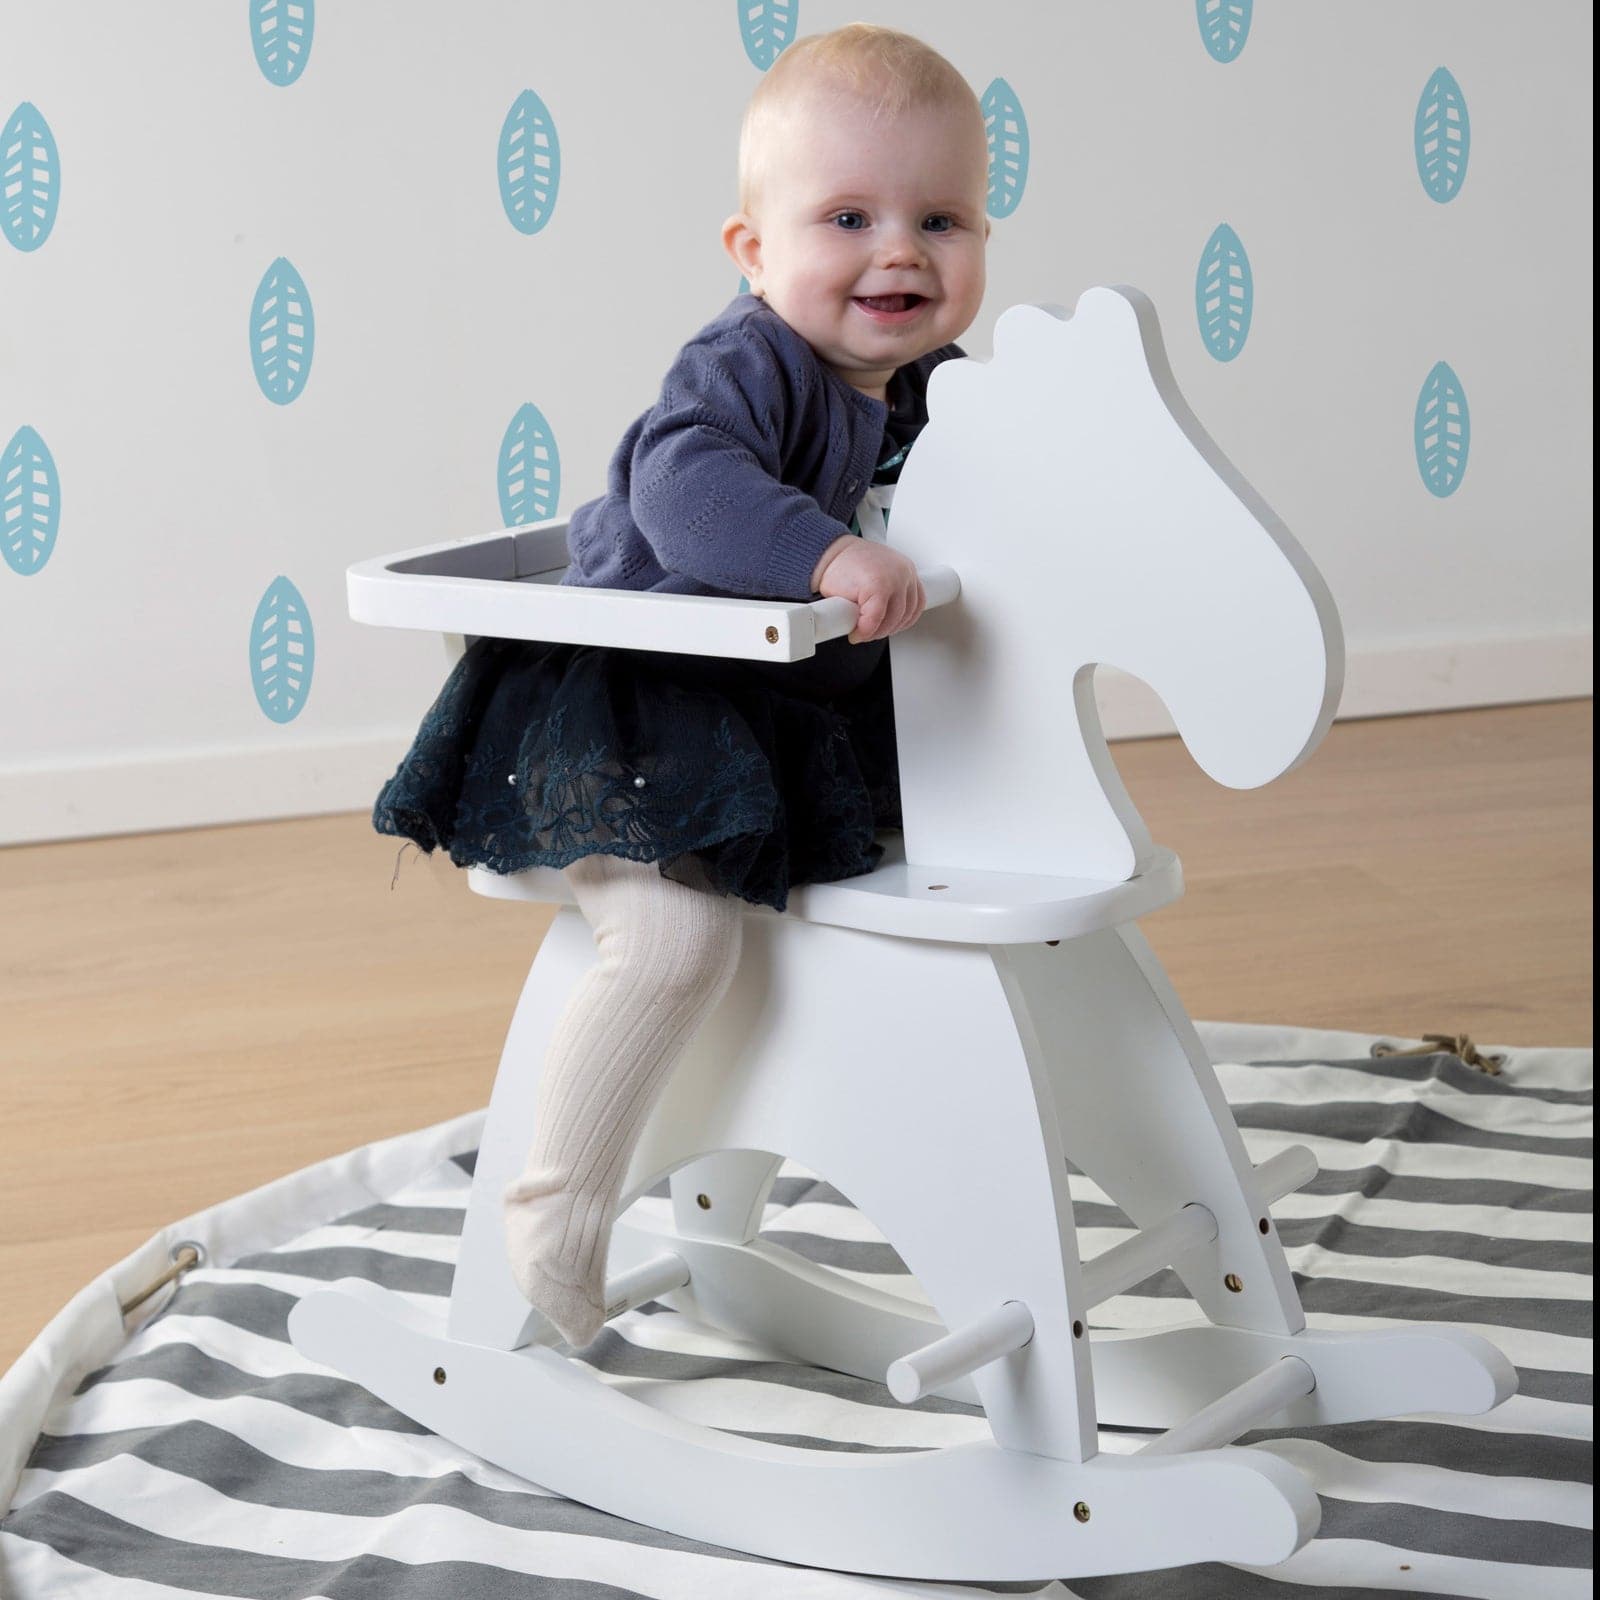 Childhome Rocking Horse White - For Your Little One